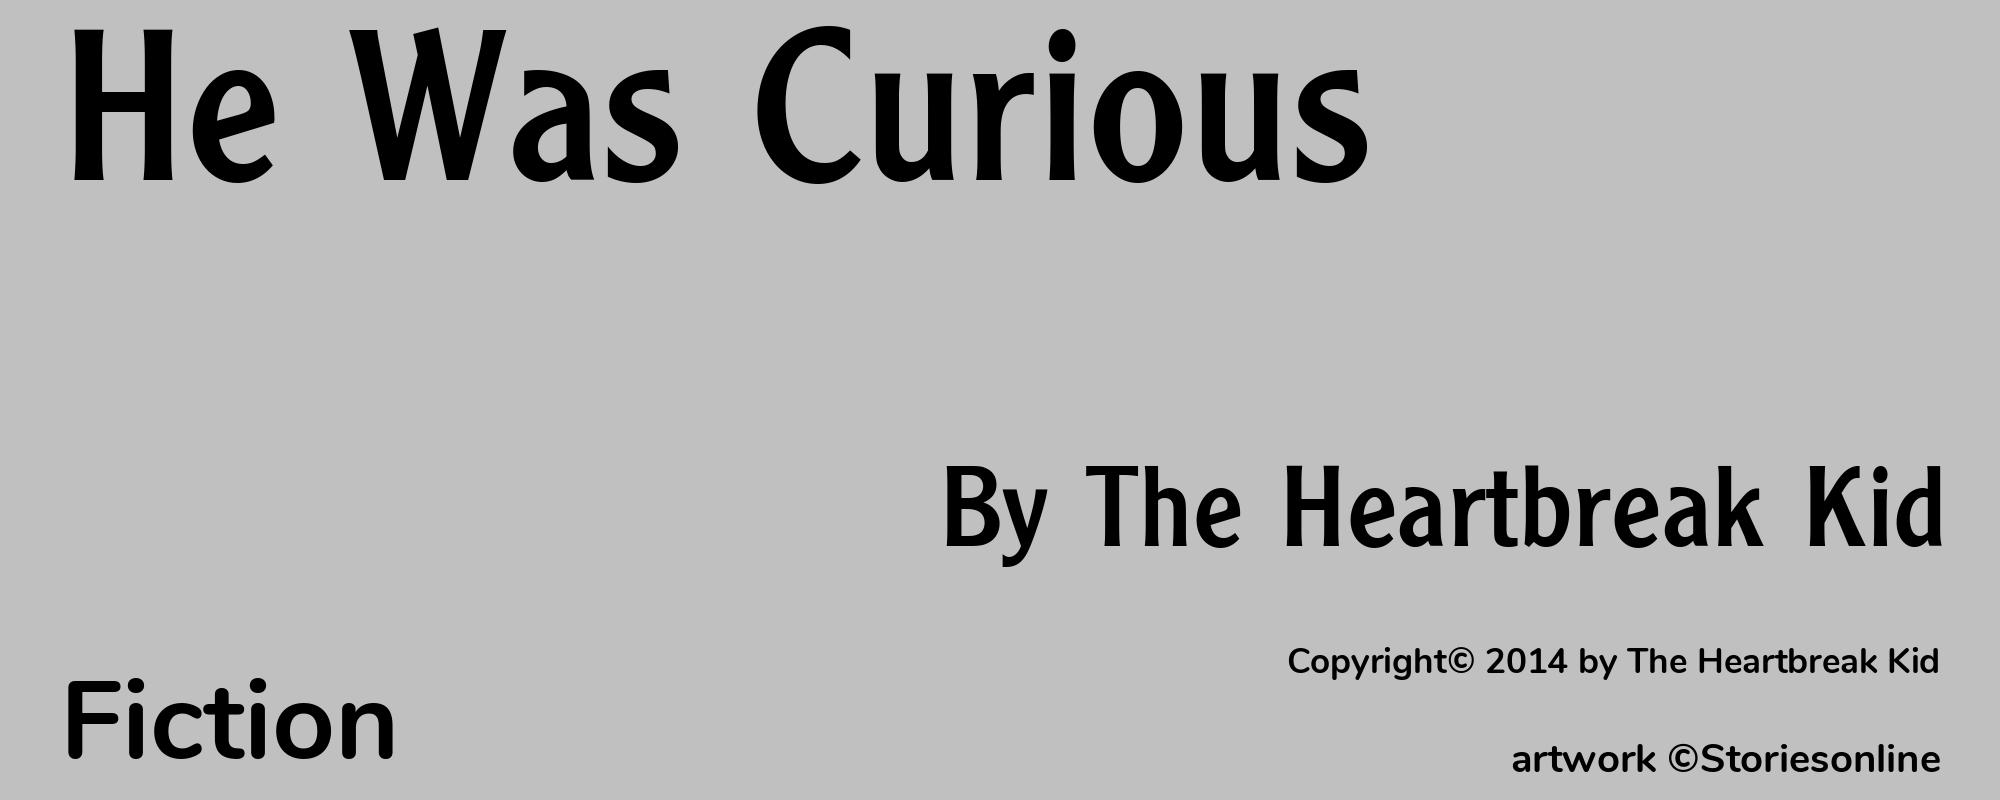 He Was Curious - Cover